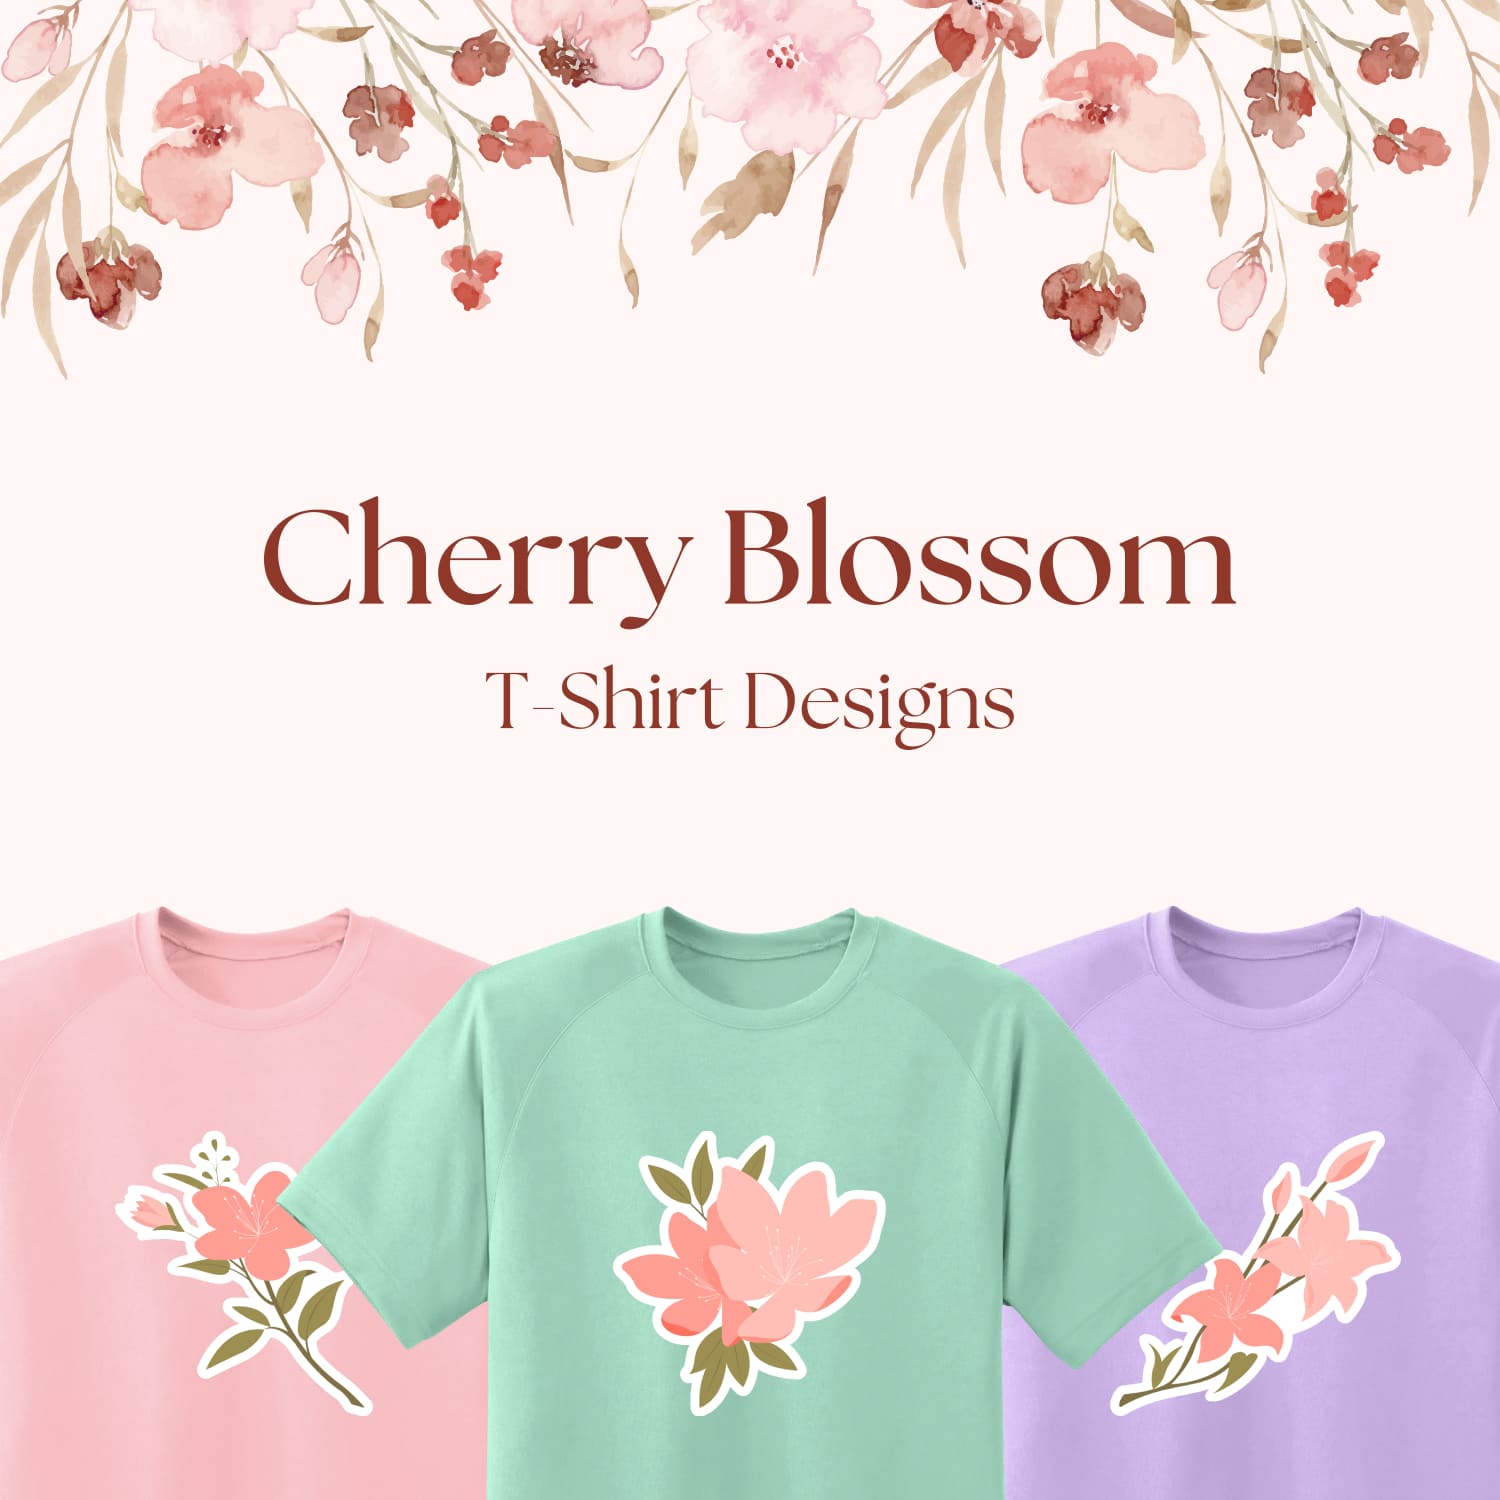 Images with cherry blossom t shirt designs.